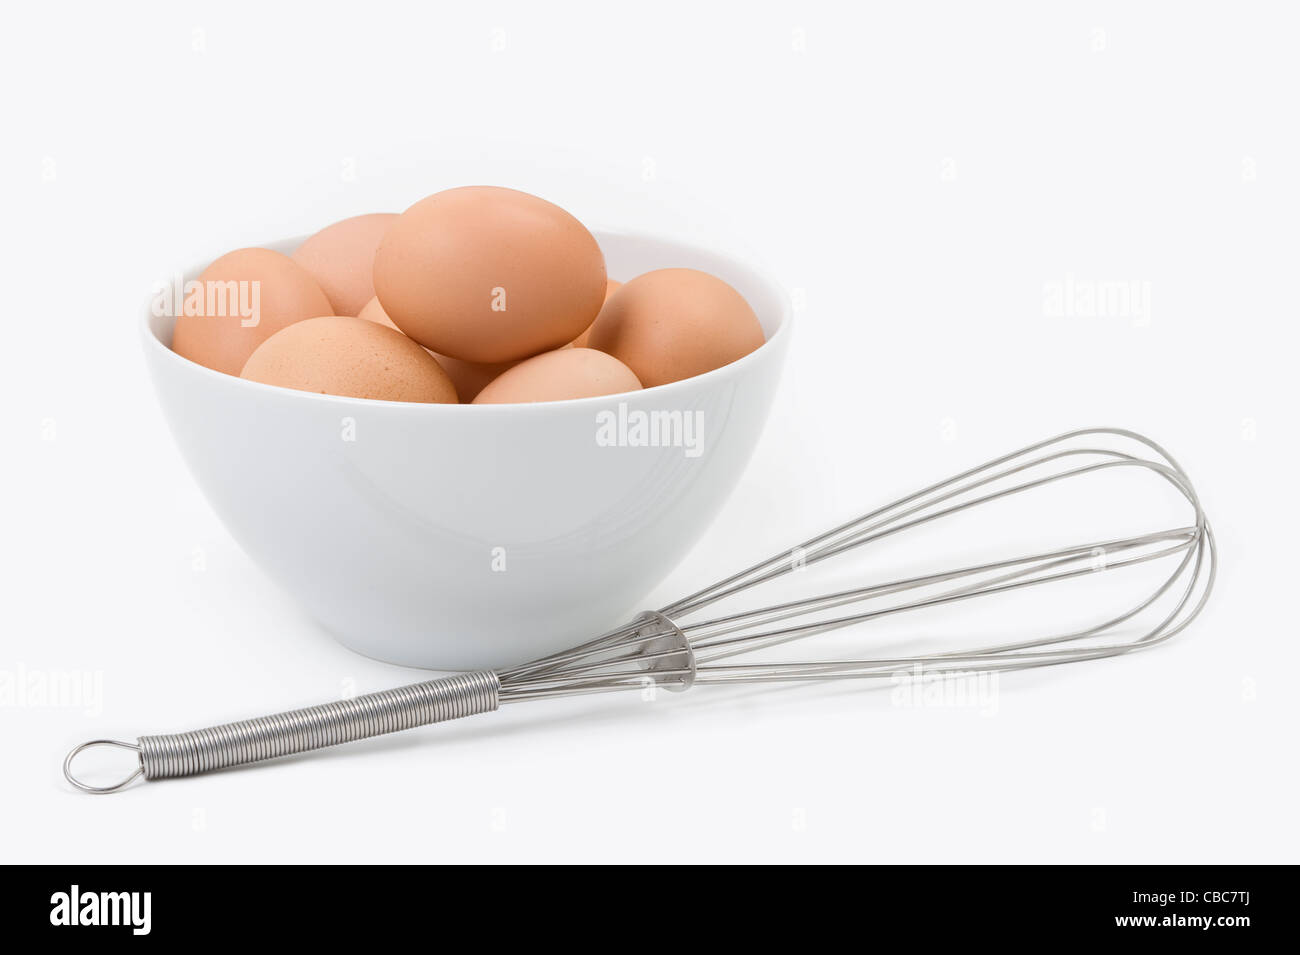 brown hens eggs in a white bowl with a stainless steel whisk against a white background Stock Photo